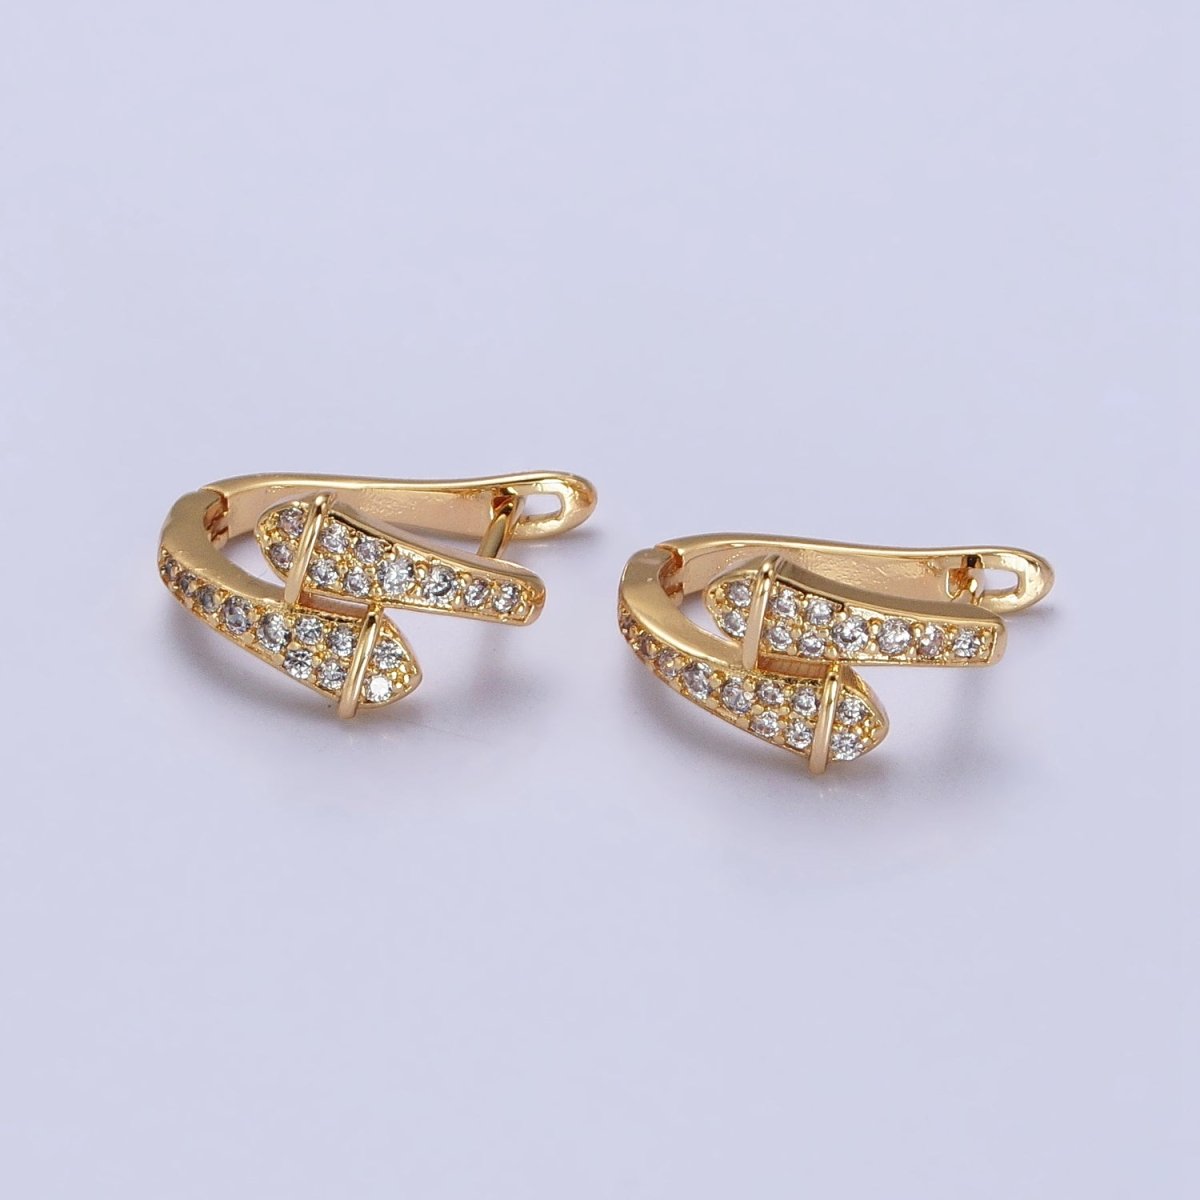 Gold, Silver Micro Paved CZ Double Serpent Snake Geometric English Lock Earrings | AB442 AB451 - DLUXCA